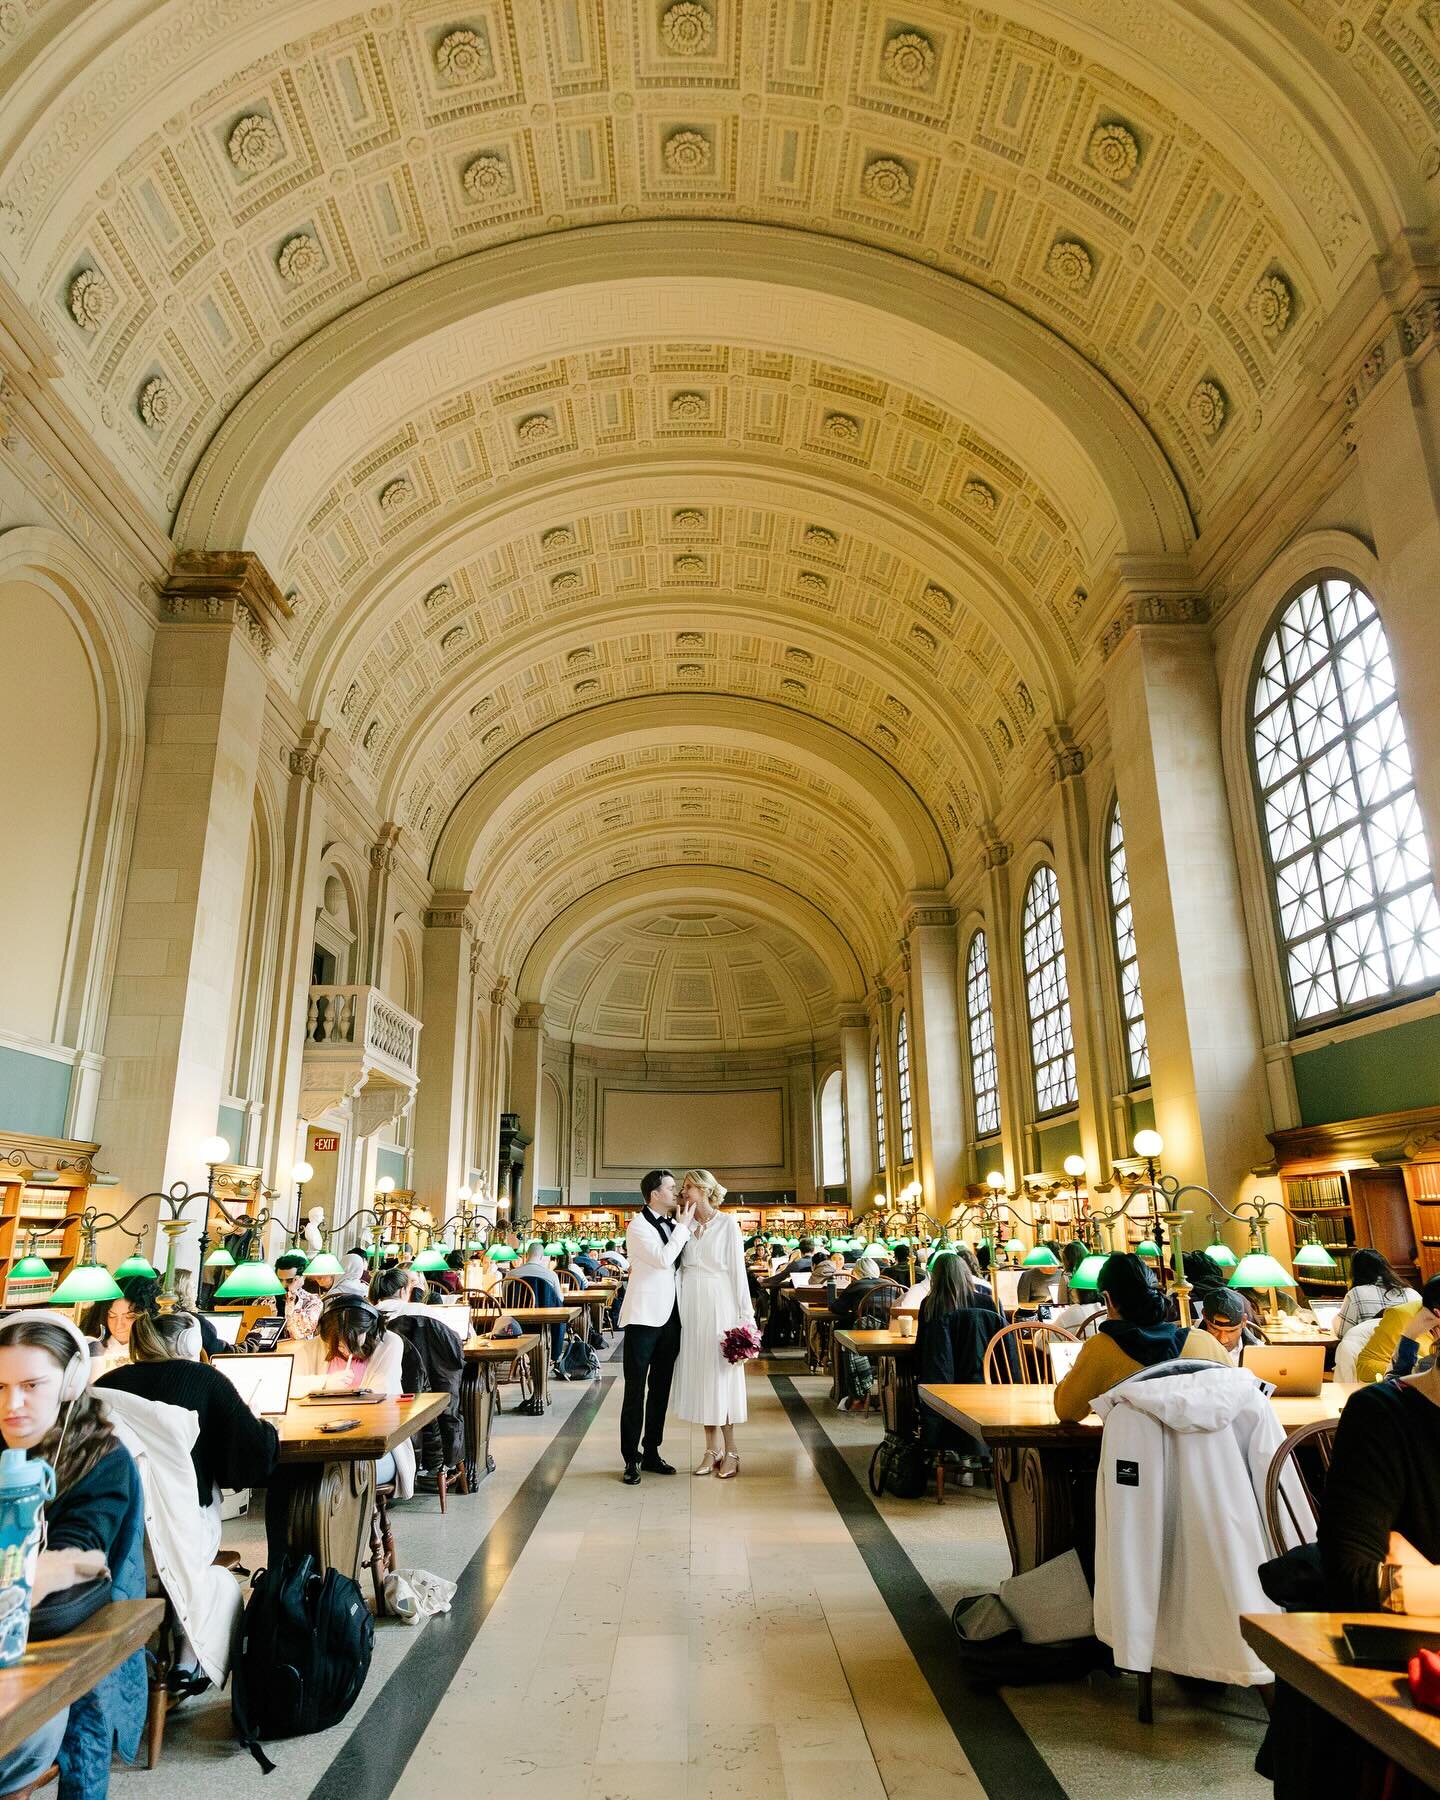 Capturing moments in the timeless halls of the Boston Public Library&mdash;where every step tells a story. Congratulations to the newlyweds who started their forever in a place as enduring as their love.